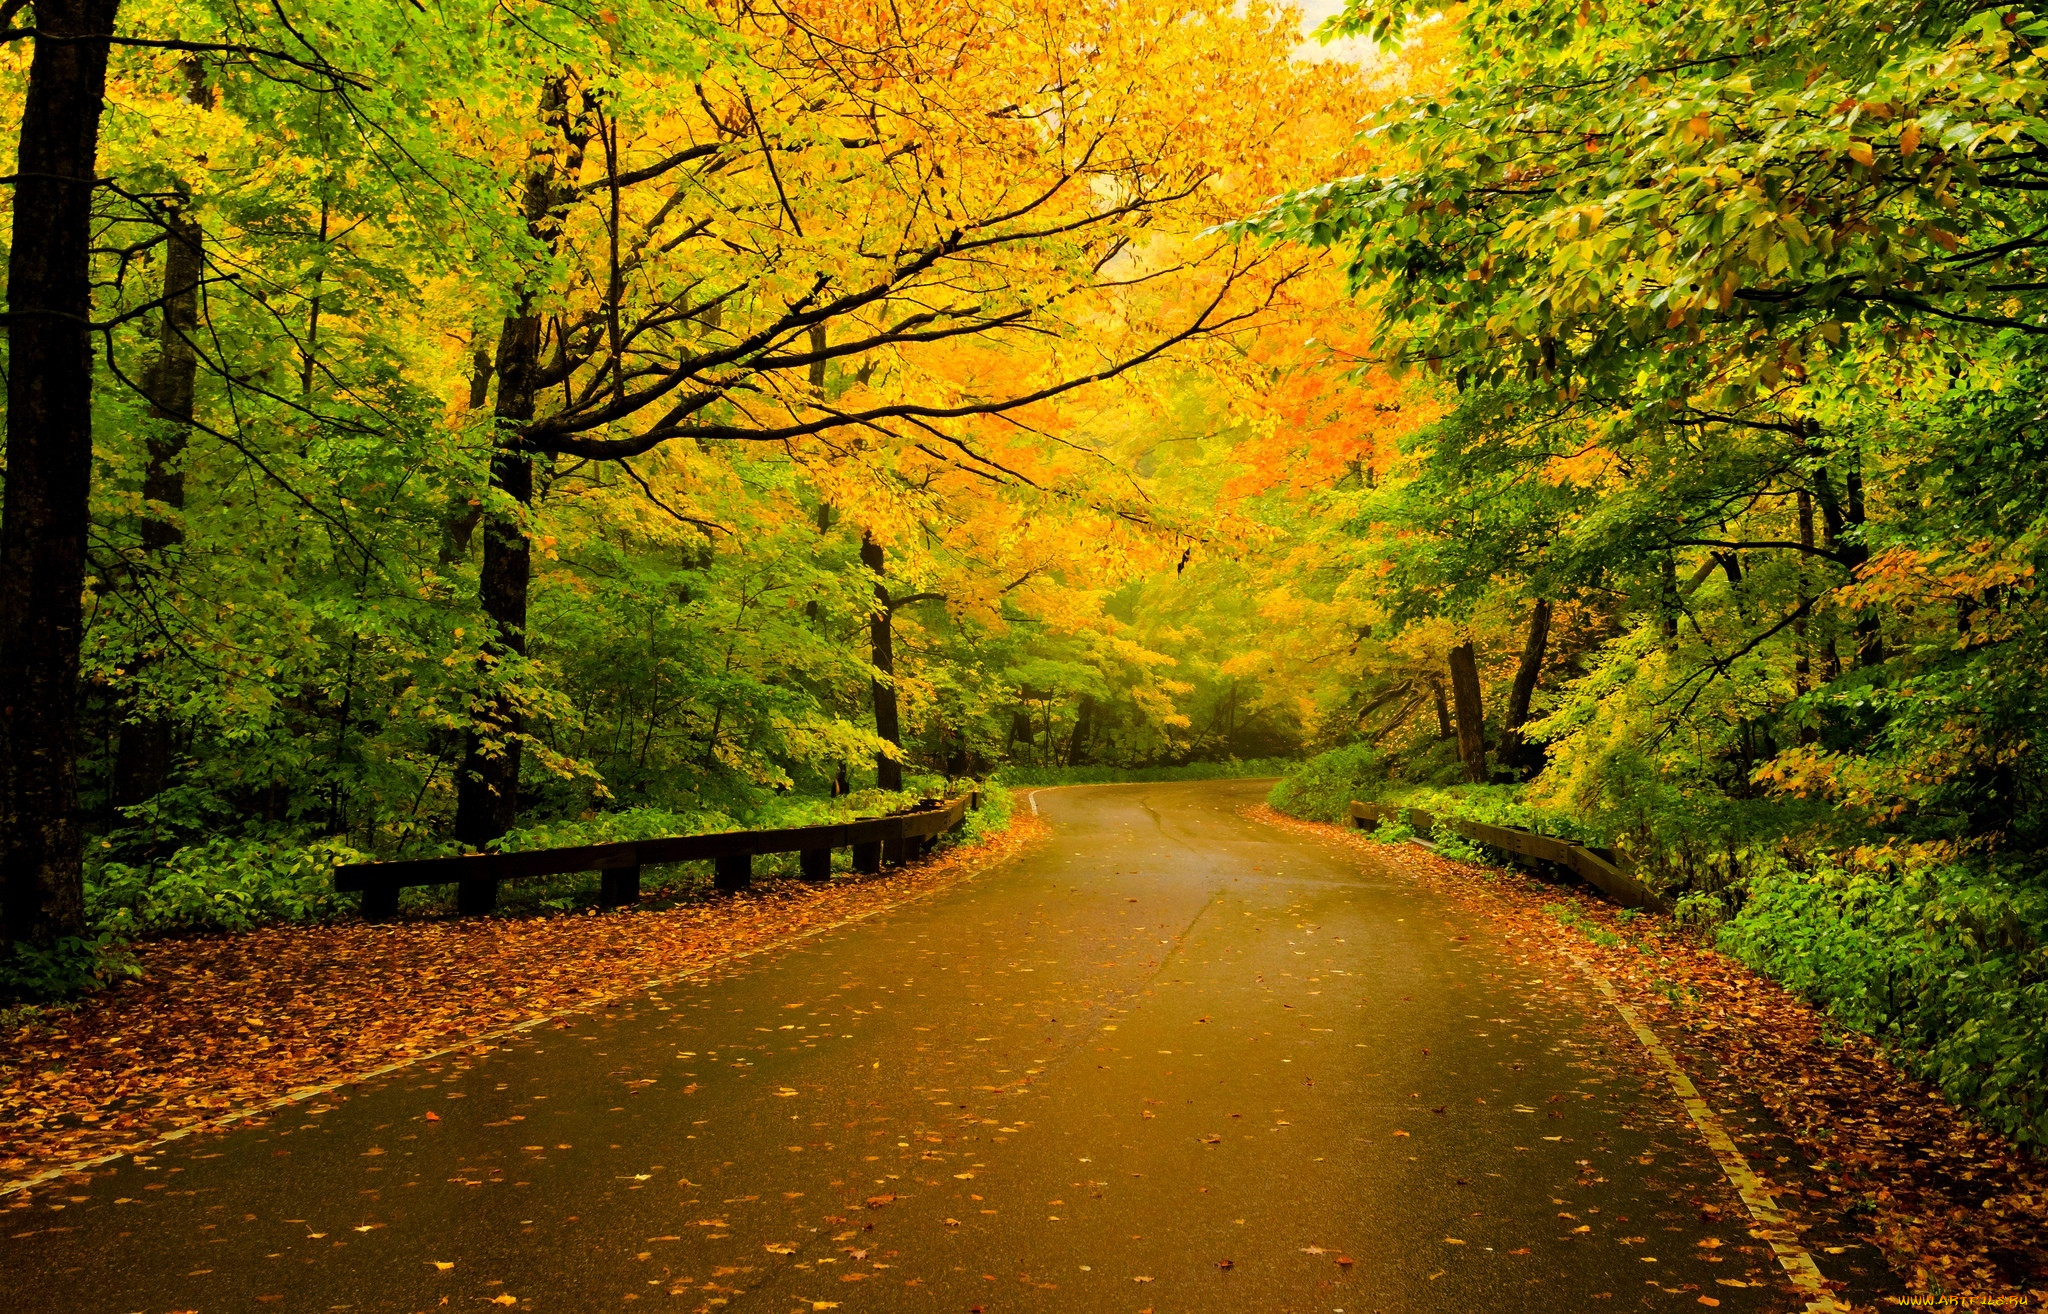 , , , , road, walk, forest, trees, leaves, colorful, nature, , , colors, fall, autumn, path